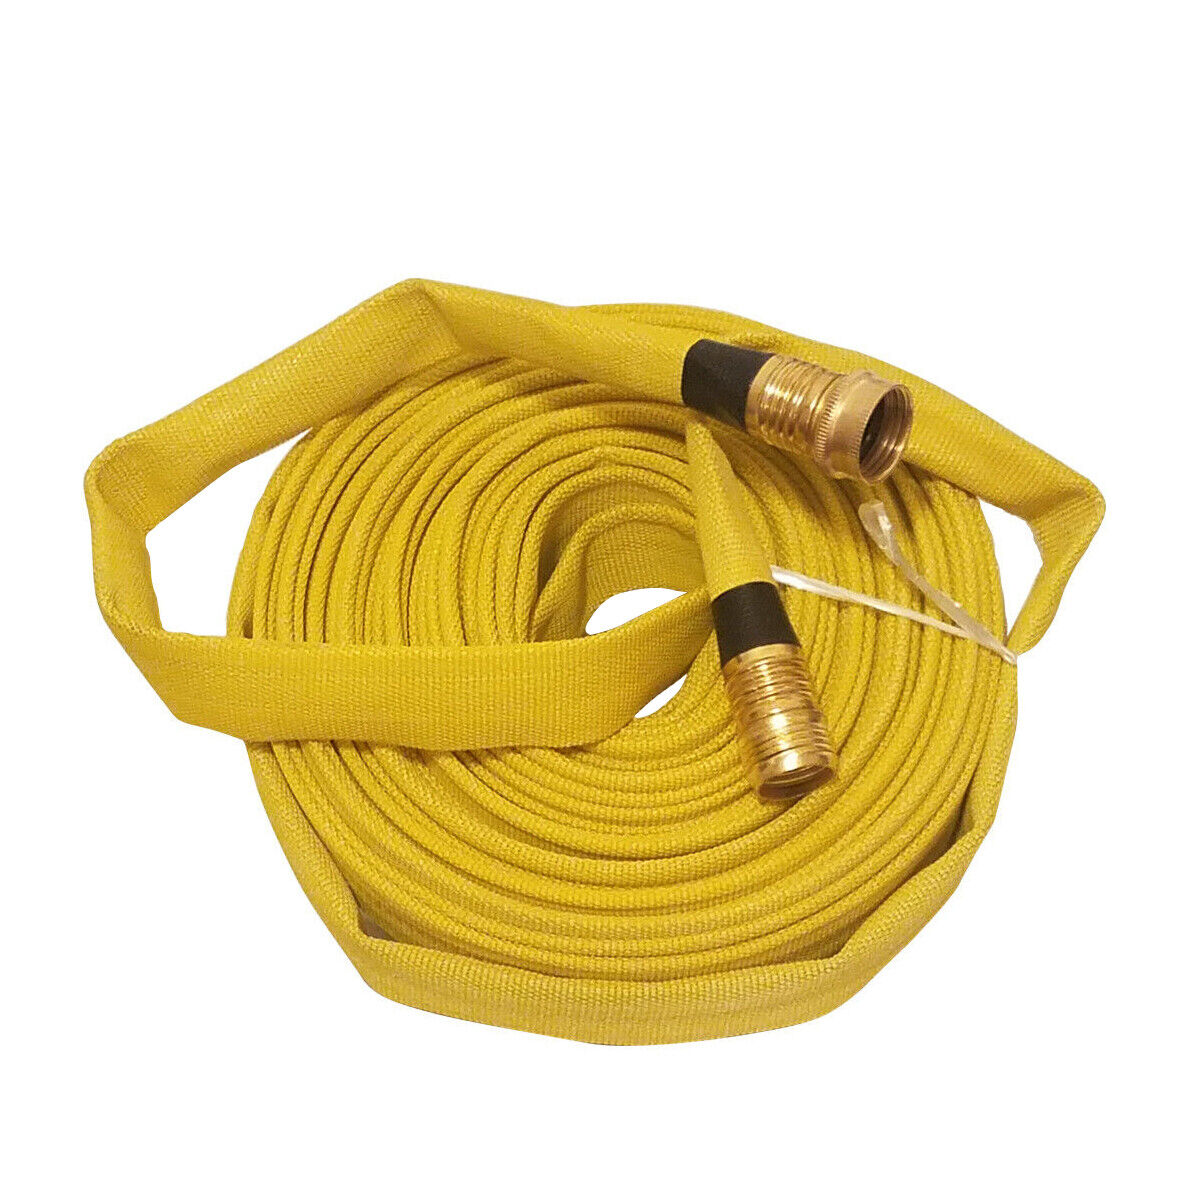 Forestry Grade Lay Flat Fire Hose with Garden Thread, YELLOW, WHITE 250 PSI